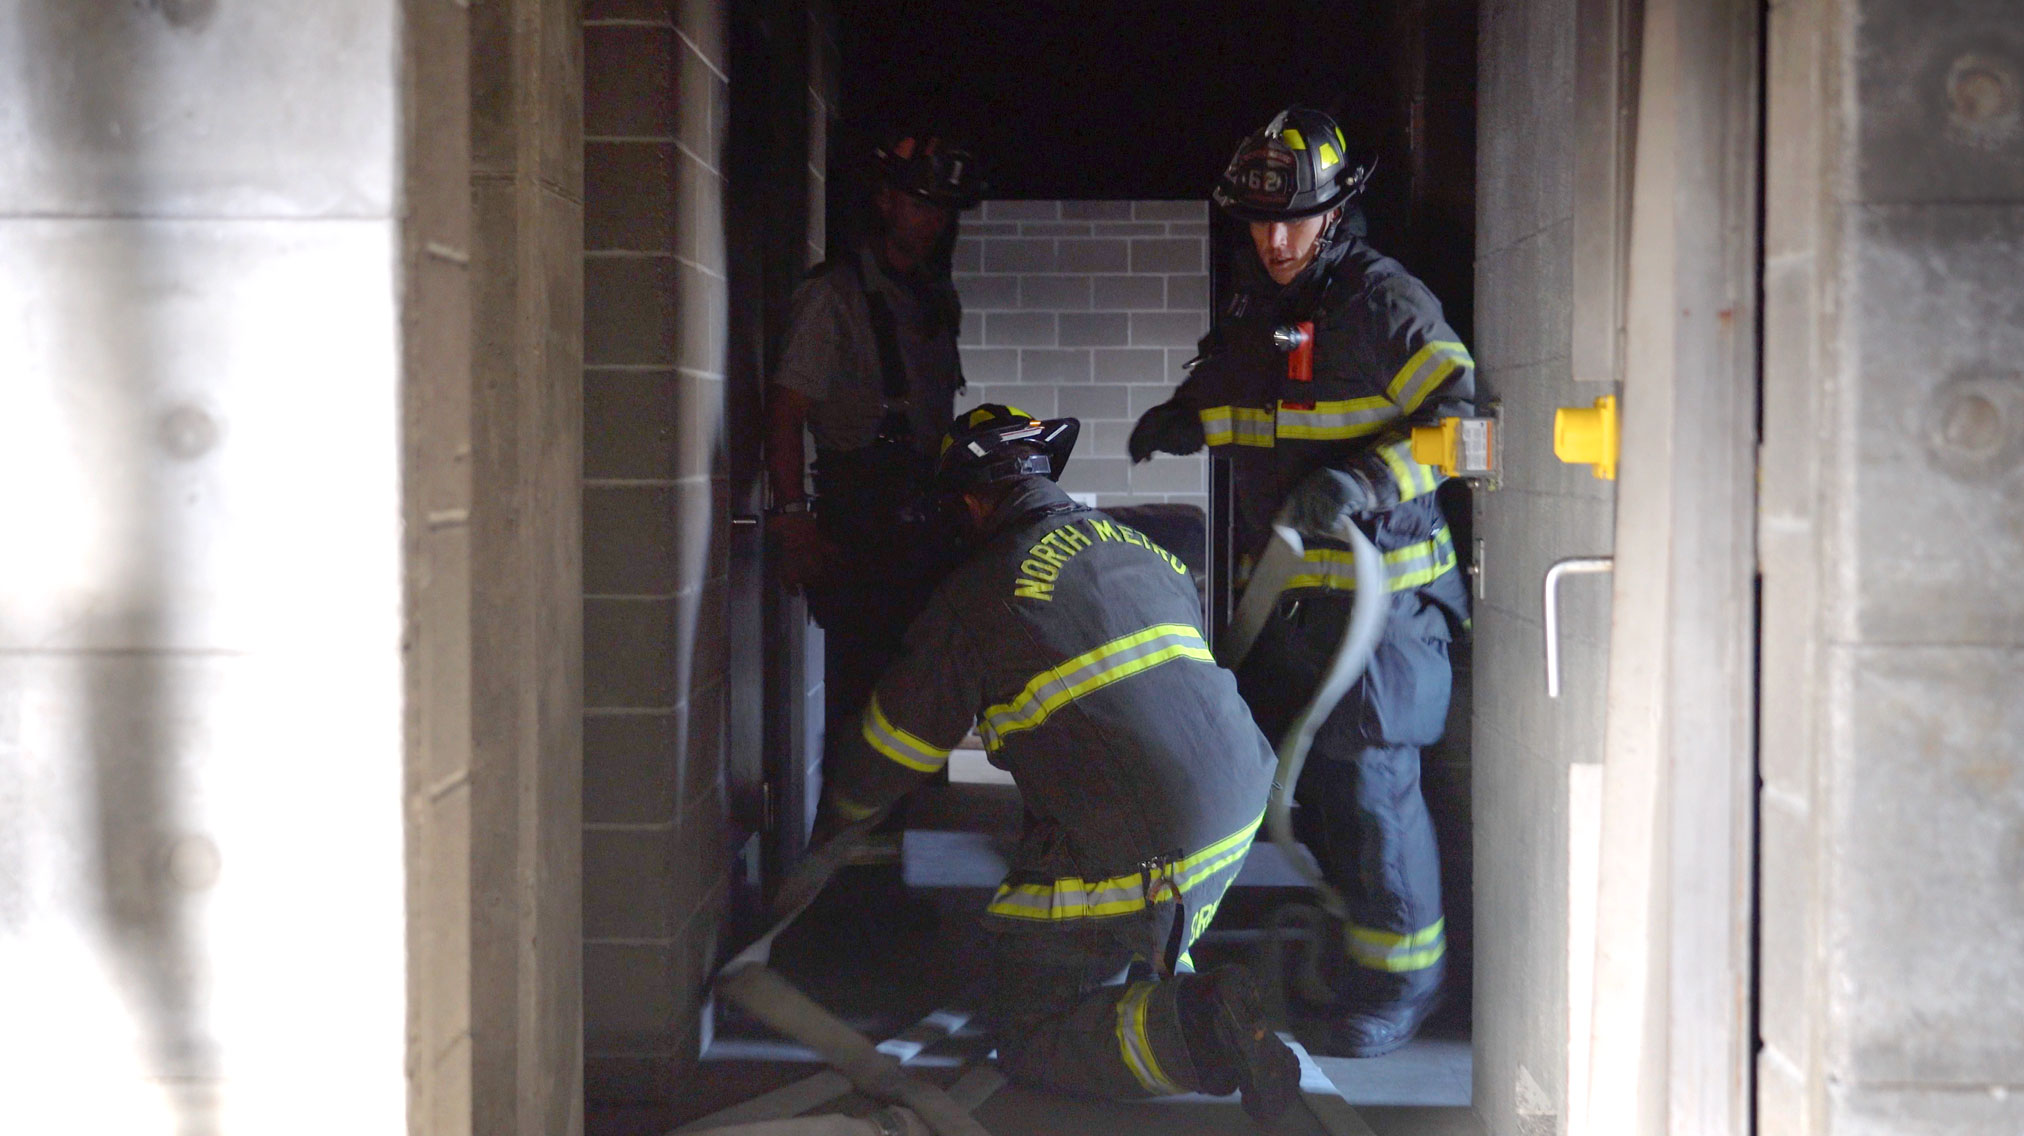 Featured image for “Setting Up for Success | Multi-Dwelling Fire Hose Layout Training”